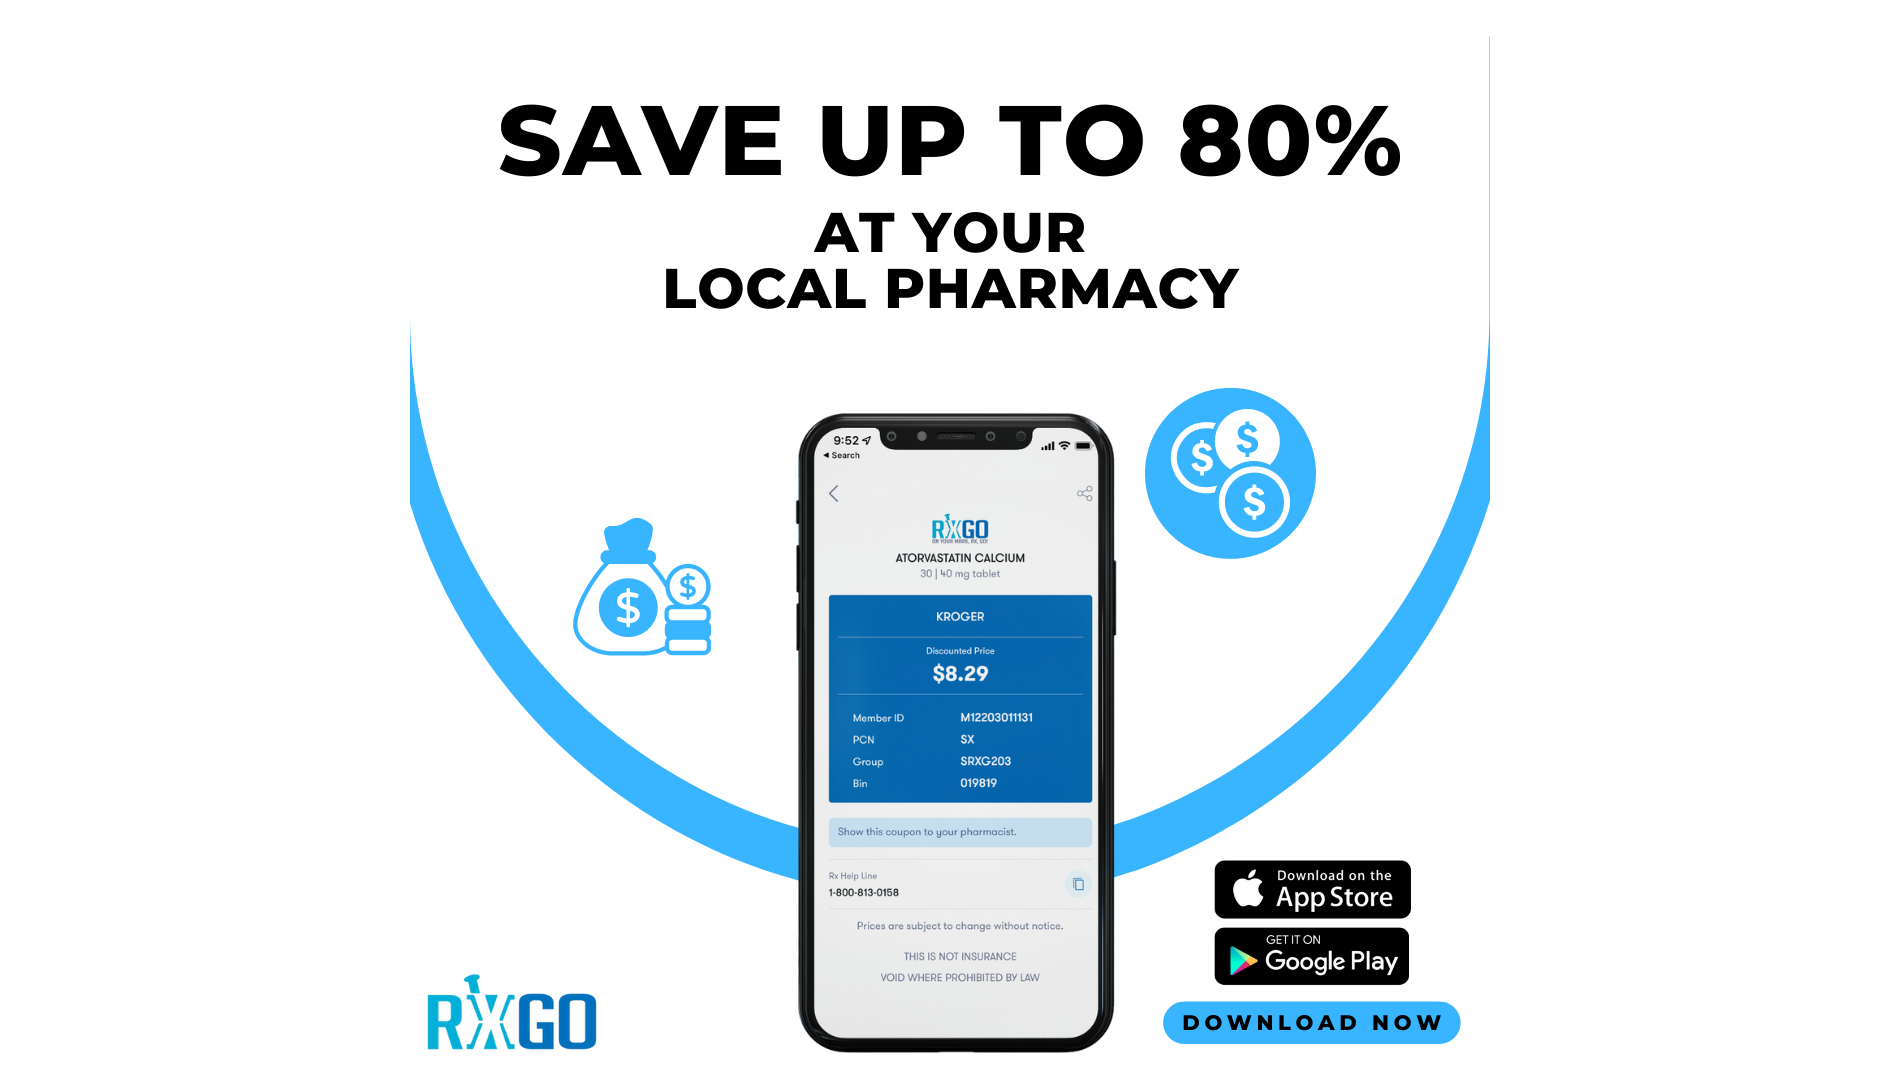 Get The Best Value Special Pricing With Prescription Discounts With No Paperwork